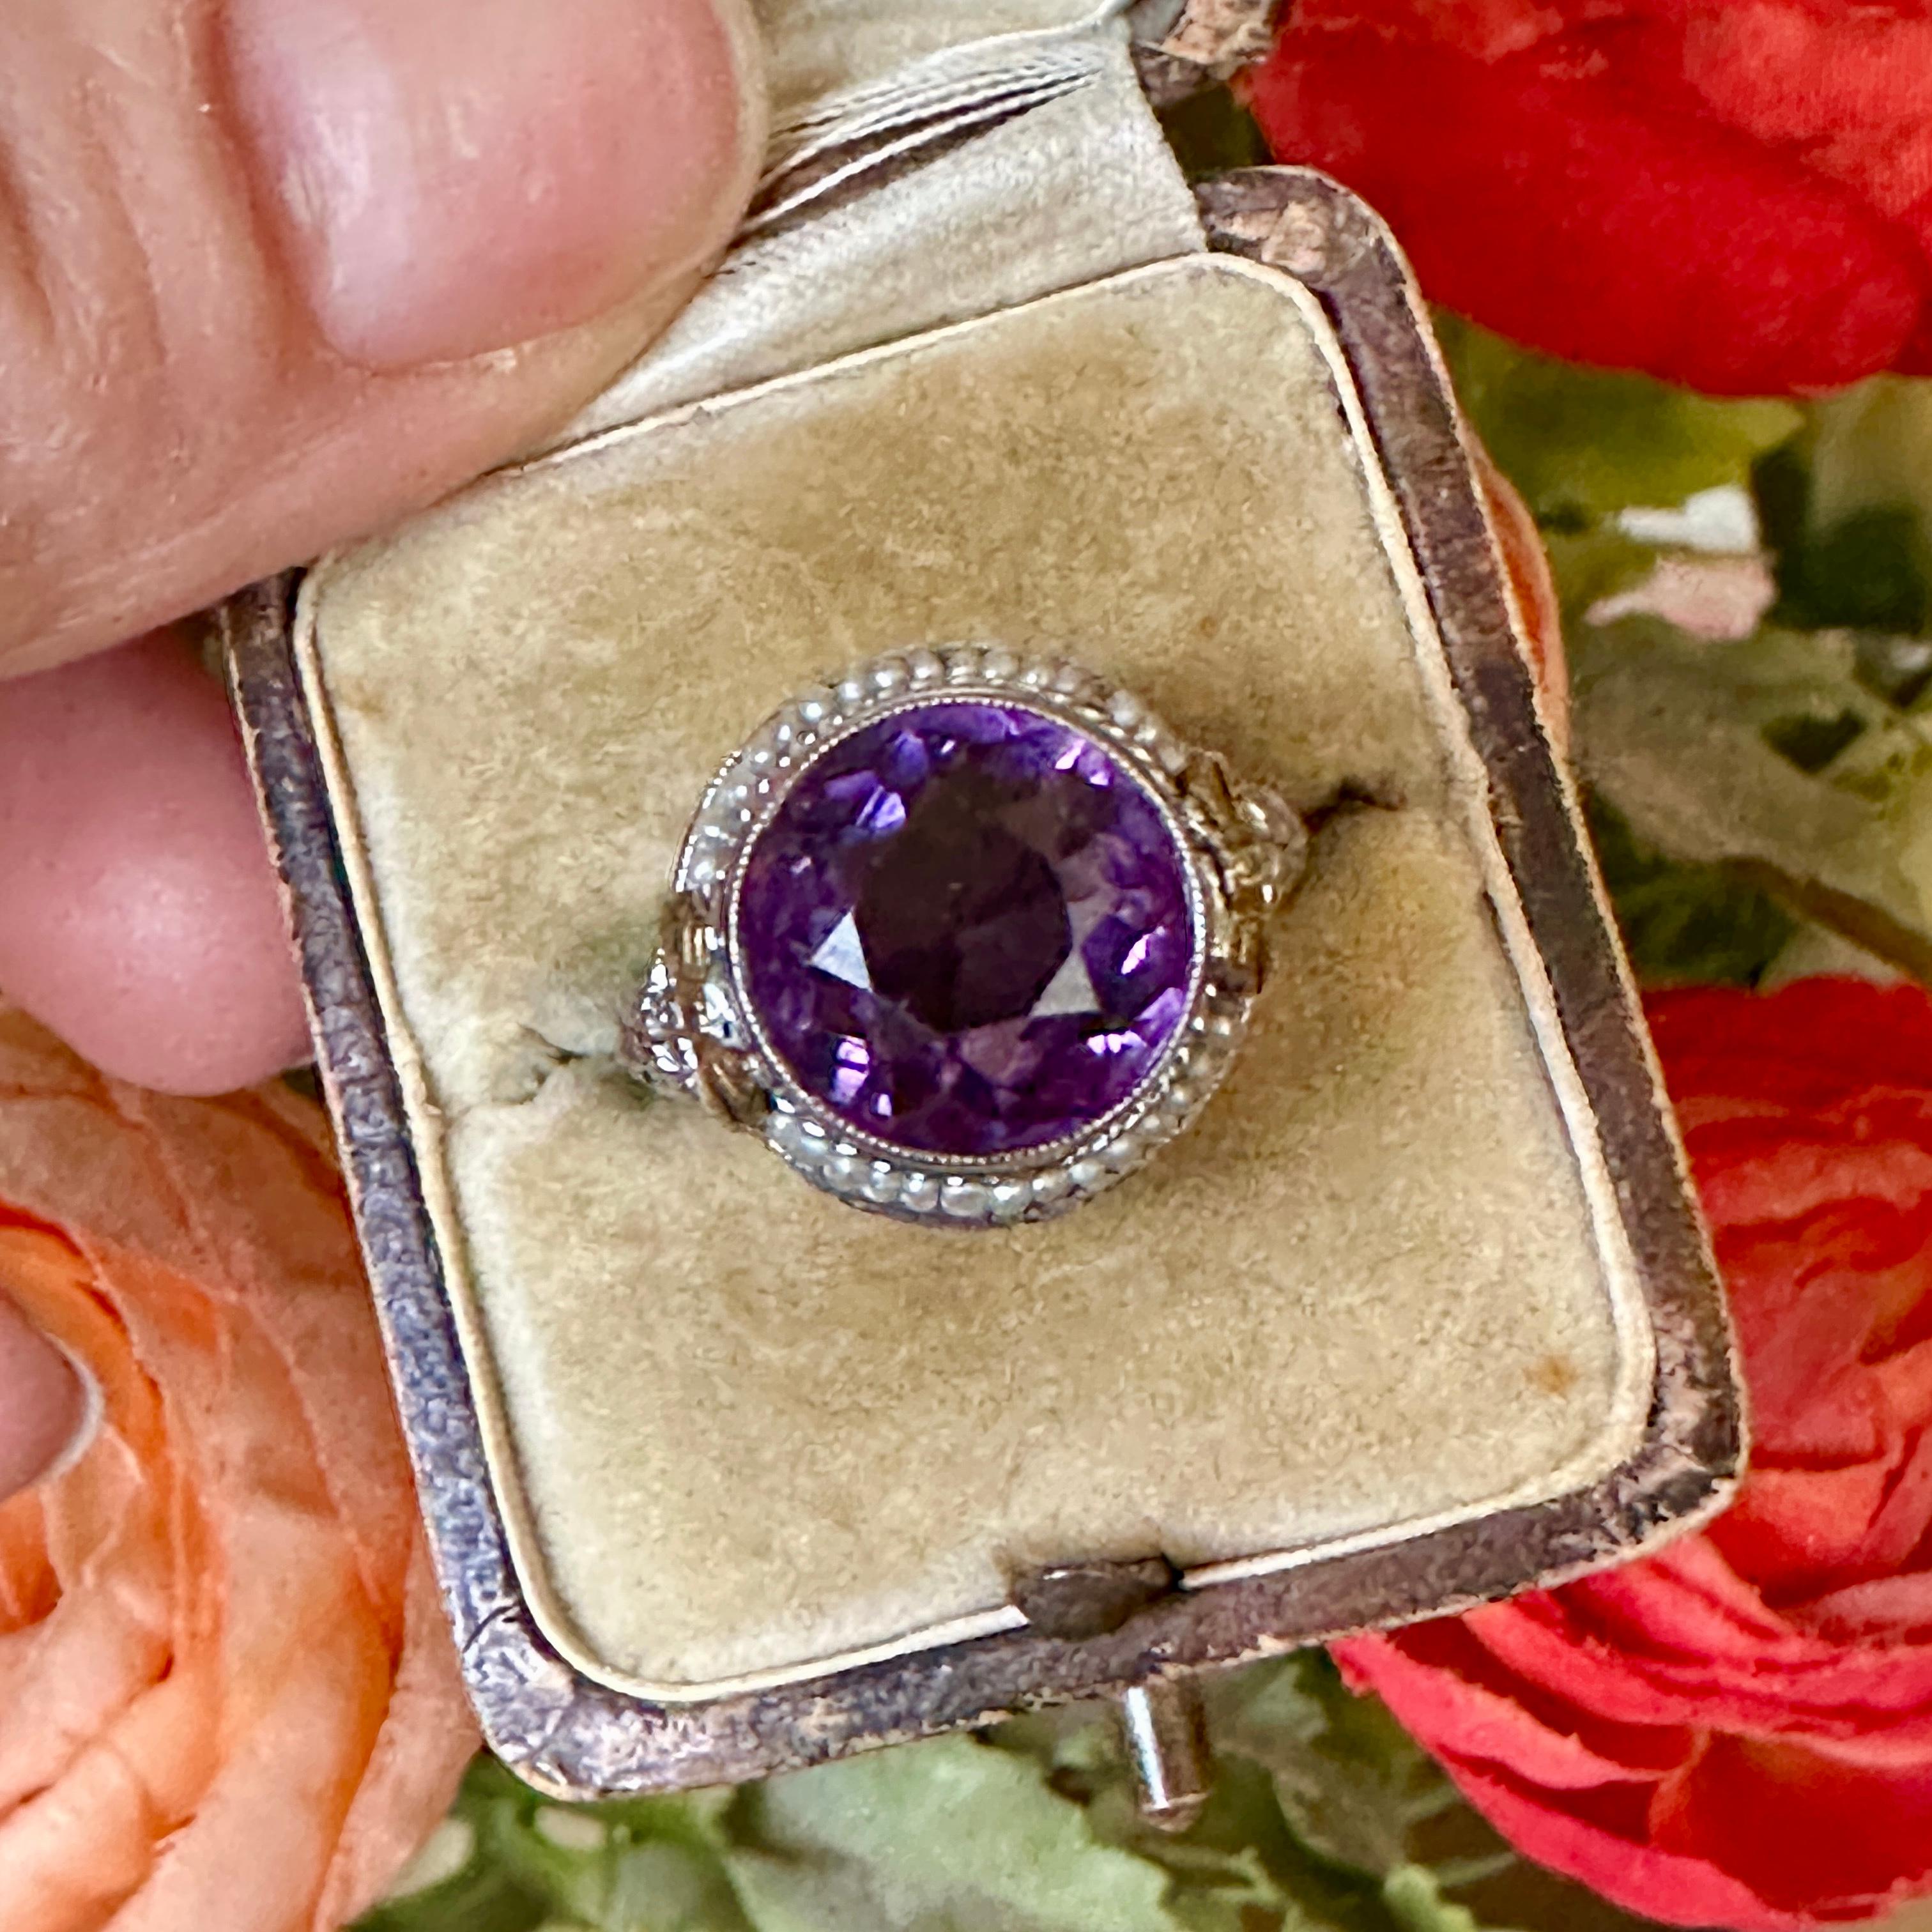 Details:
Stunning Edwardian period amethyst, seed pearl and 14K white and yellow gold filigree ring! We love the sweet bow details on the shoulders of the setting! The stone measures 11mm, and the ring is 8mm above the finger at the highest point on